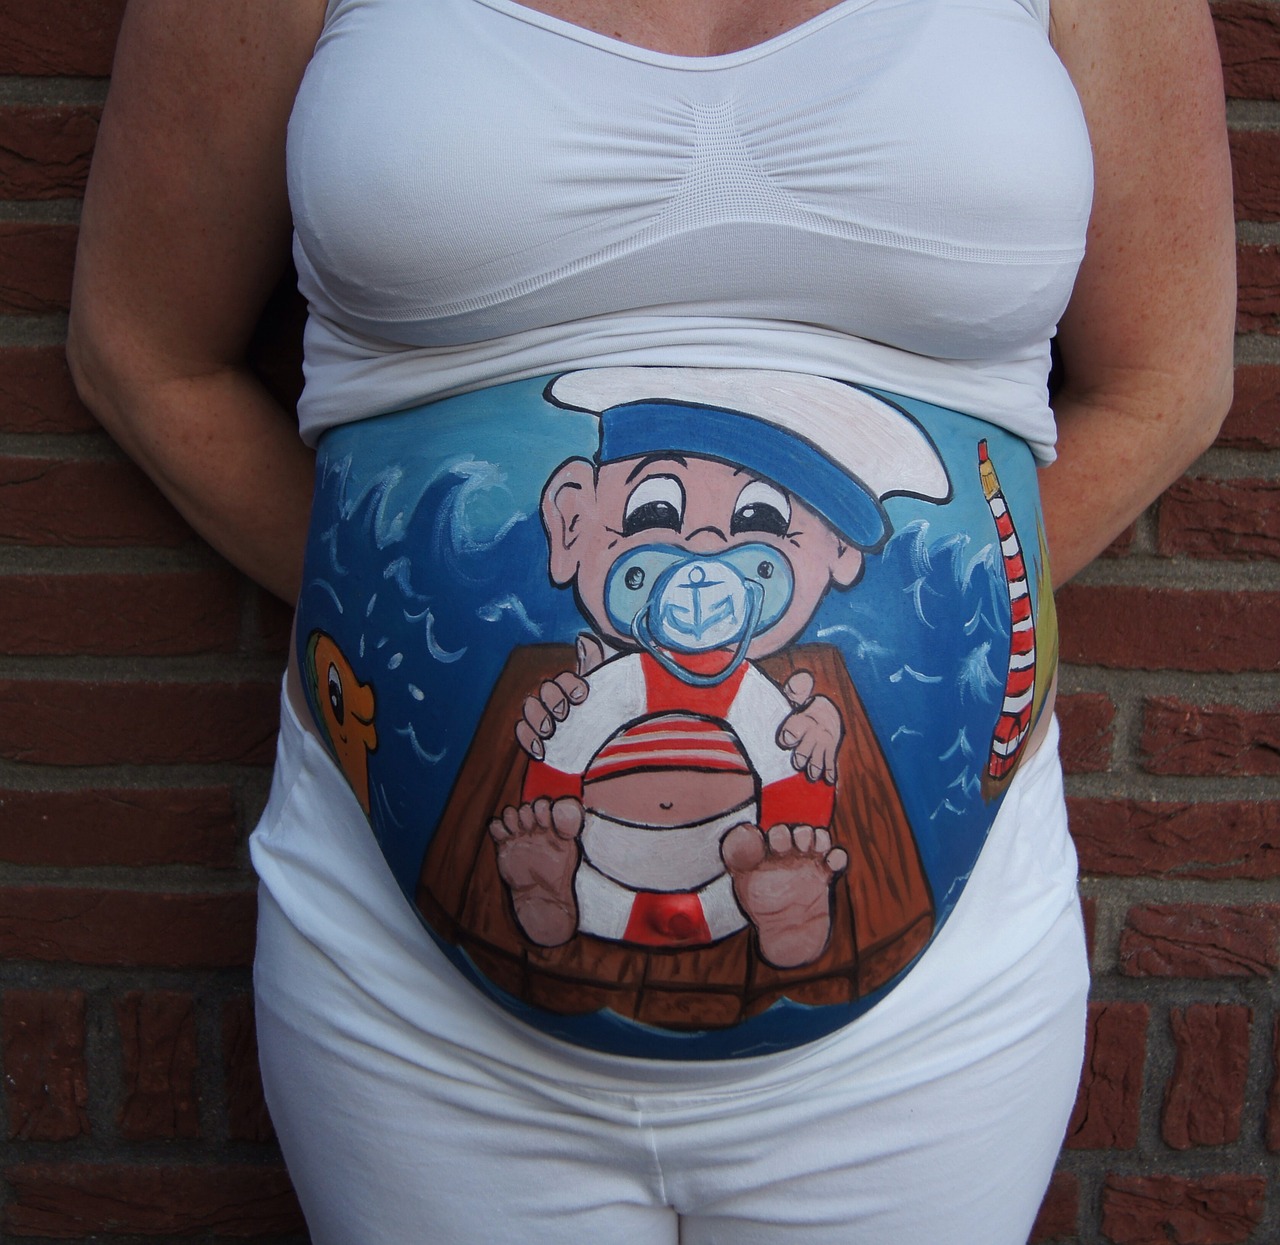 pregnant bellypaint belly painting free photo